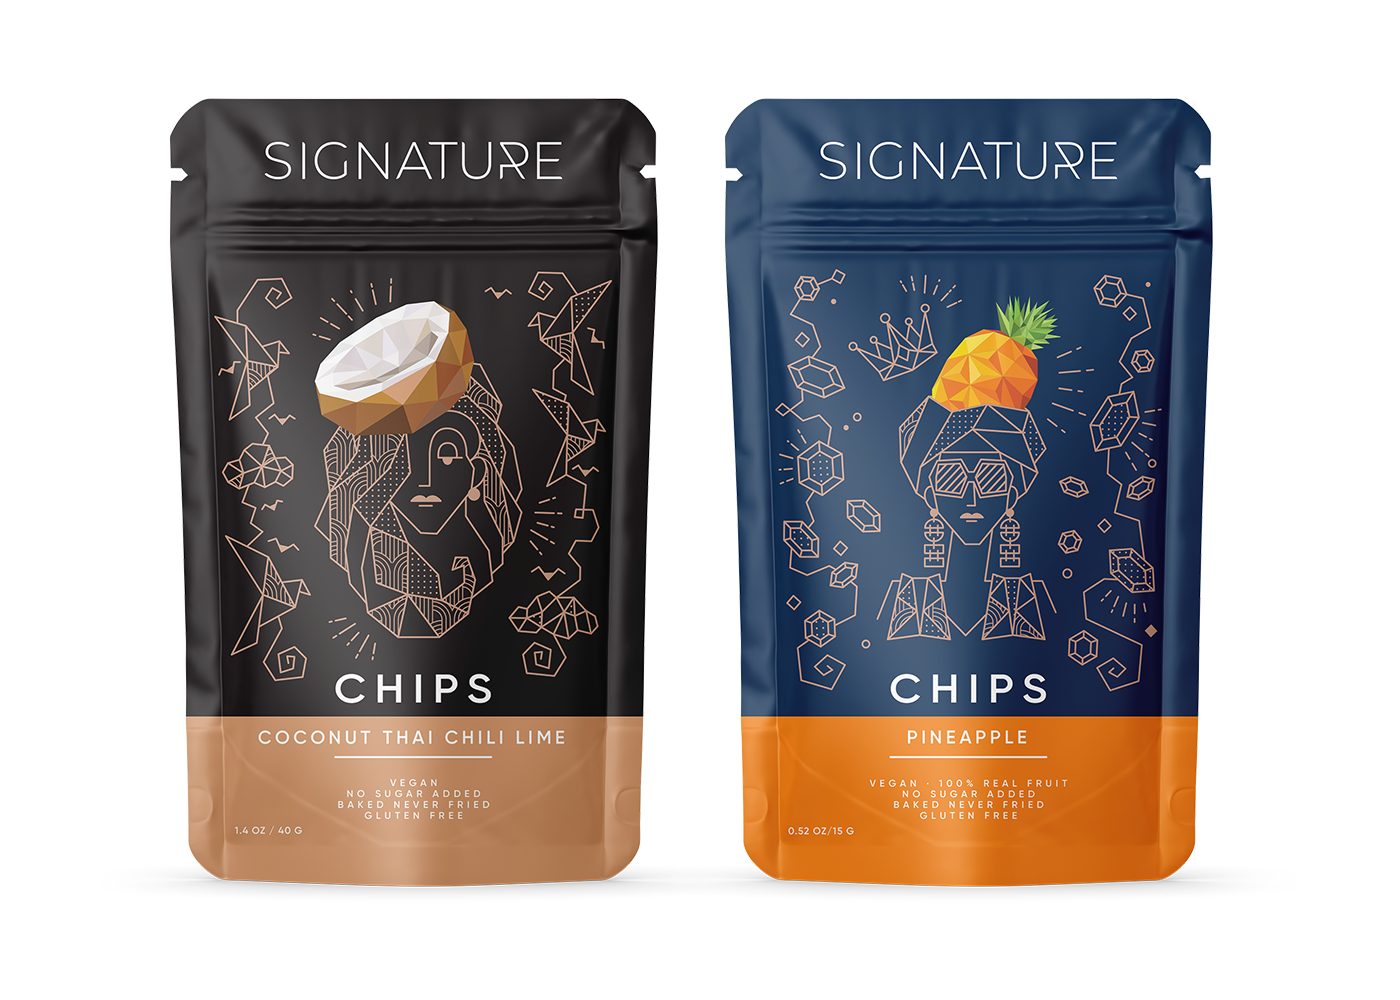 Character chips doypack fruit chips package packaging design Saudi signature Marketing Design brand identity